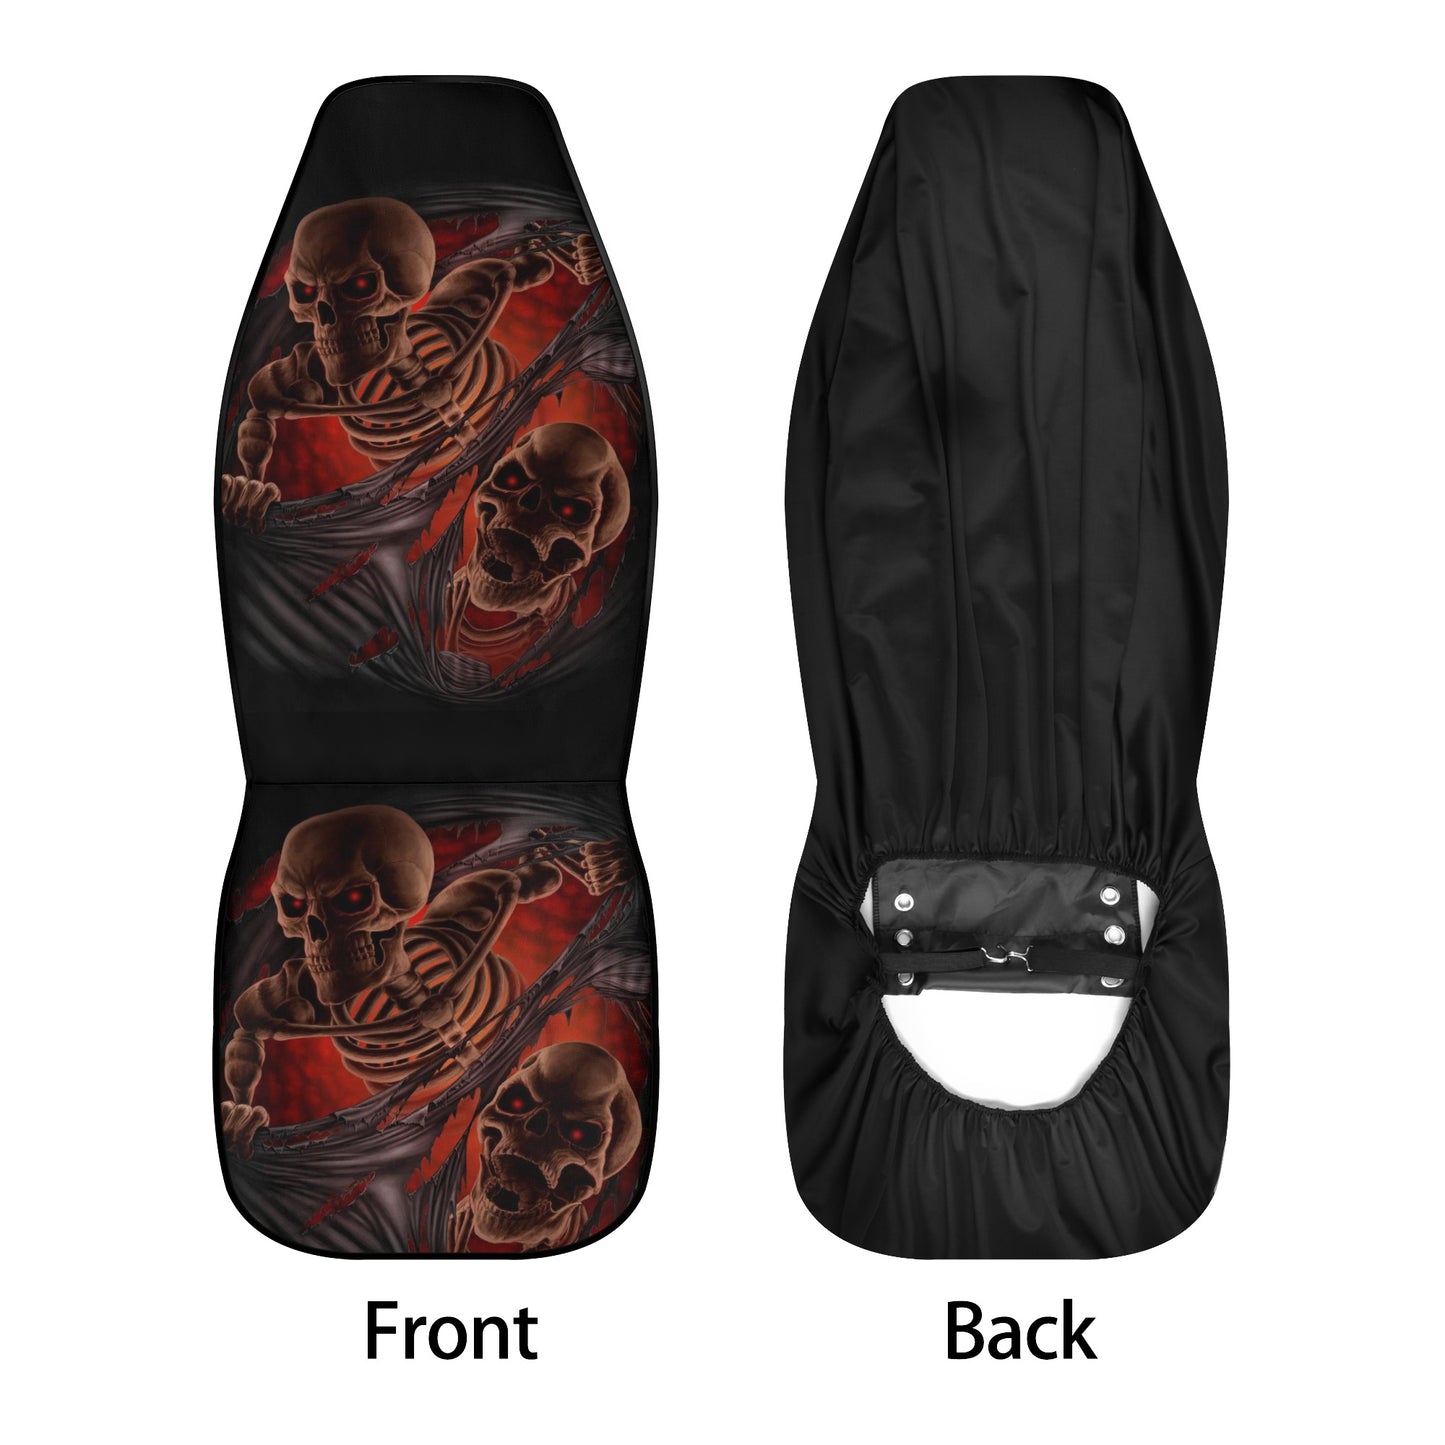 Floral skull car seat cover full set, grim reaper truck seat cover, floral skull slip-on seat covers, skeleton cover cushion accessories for